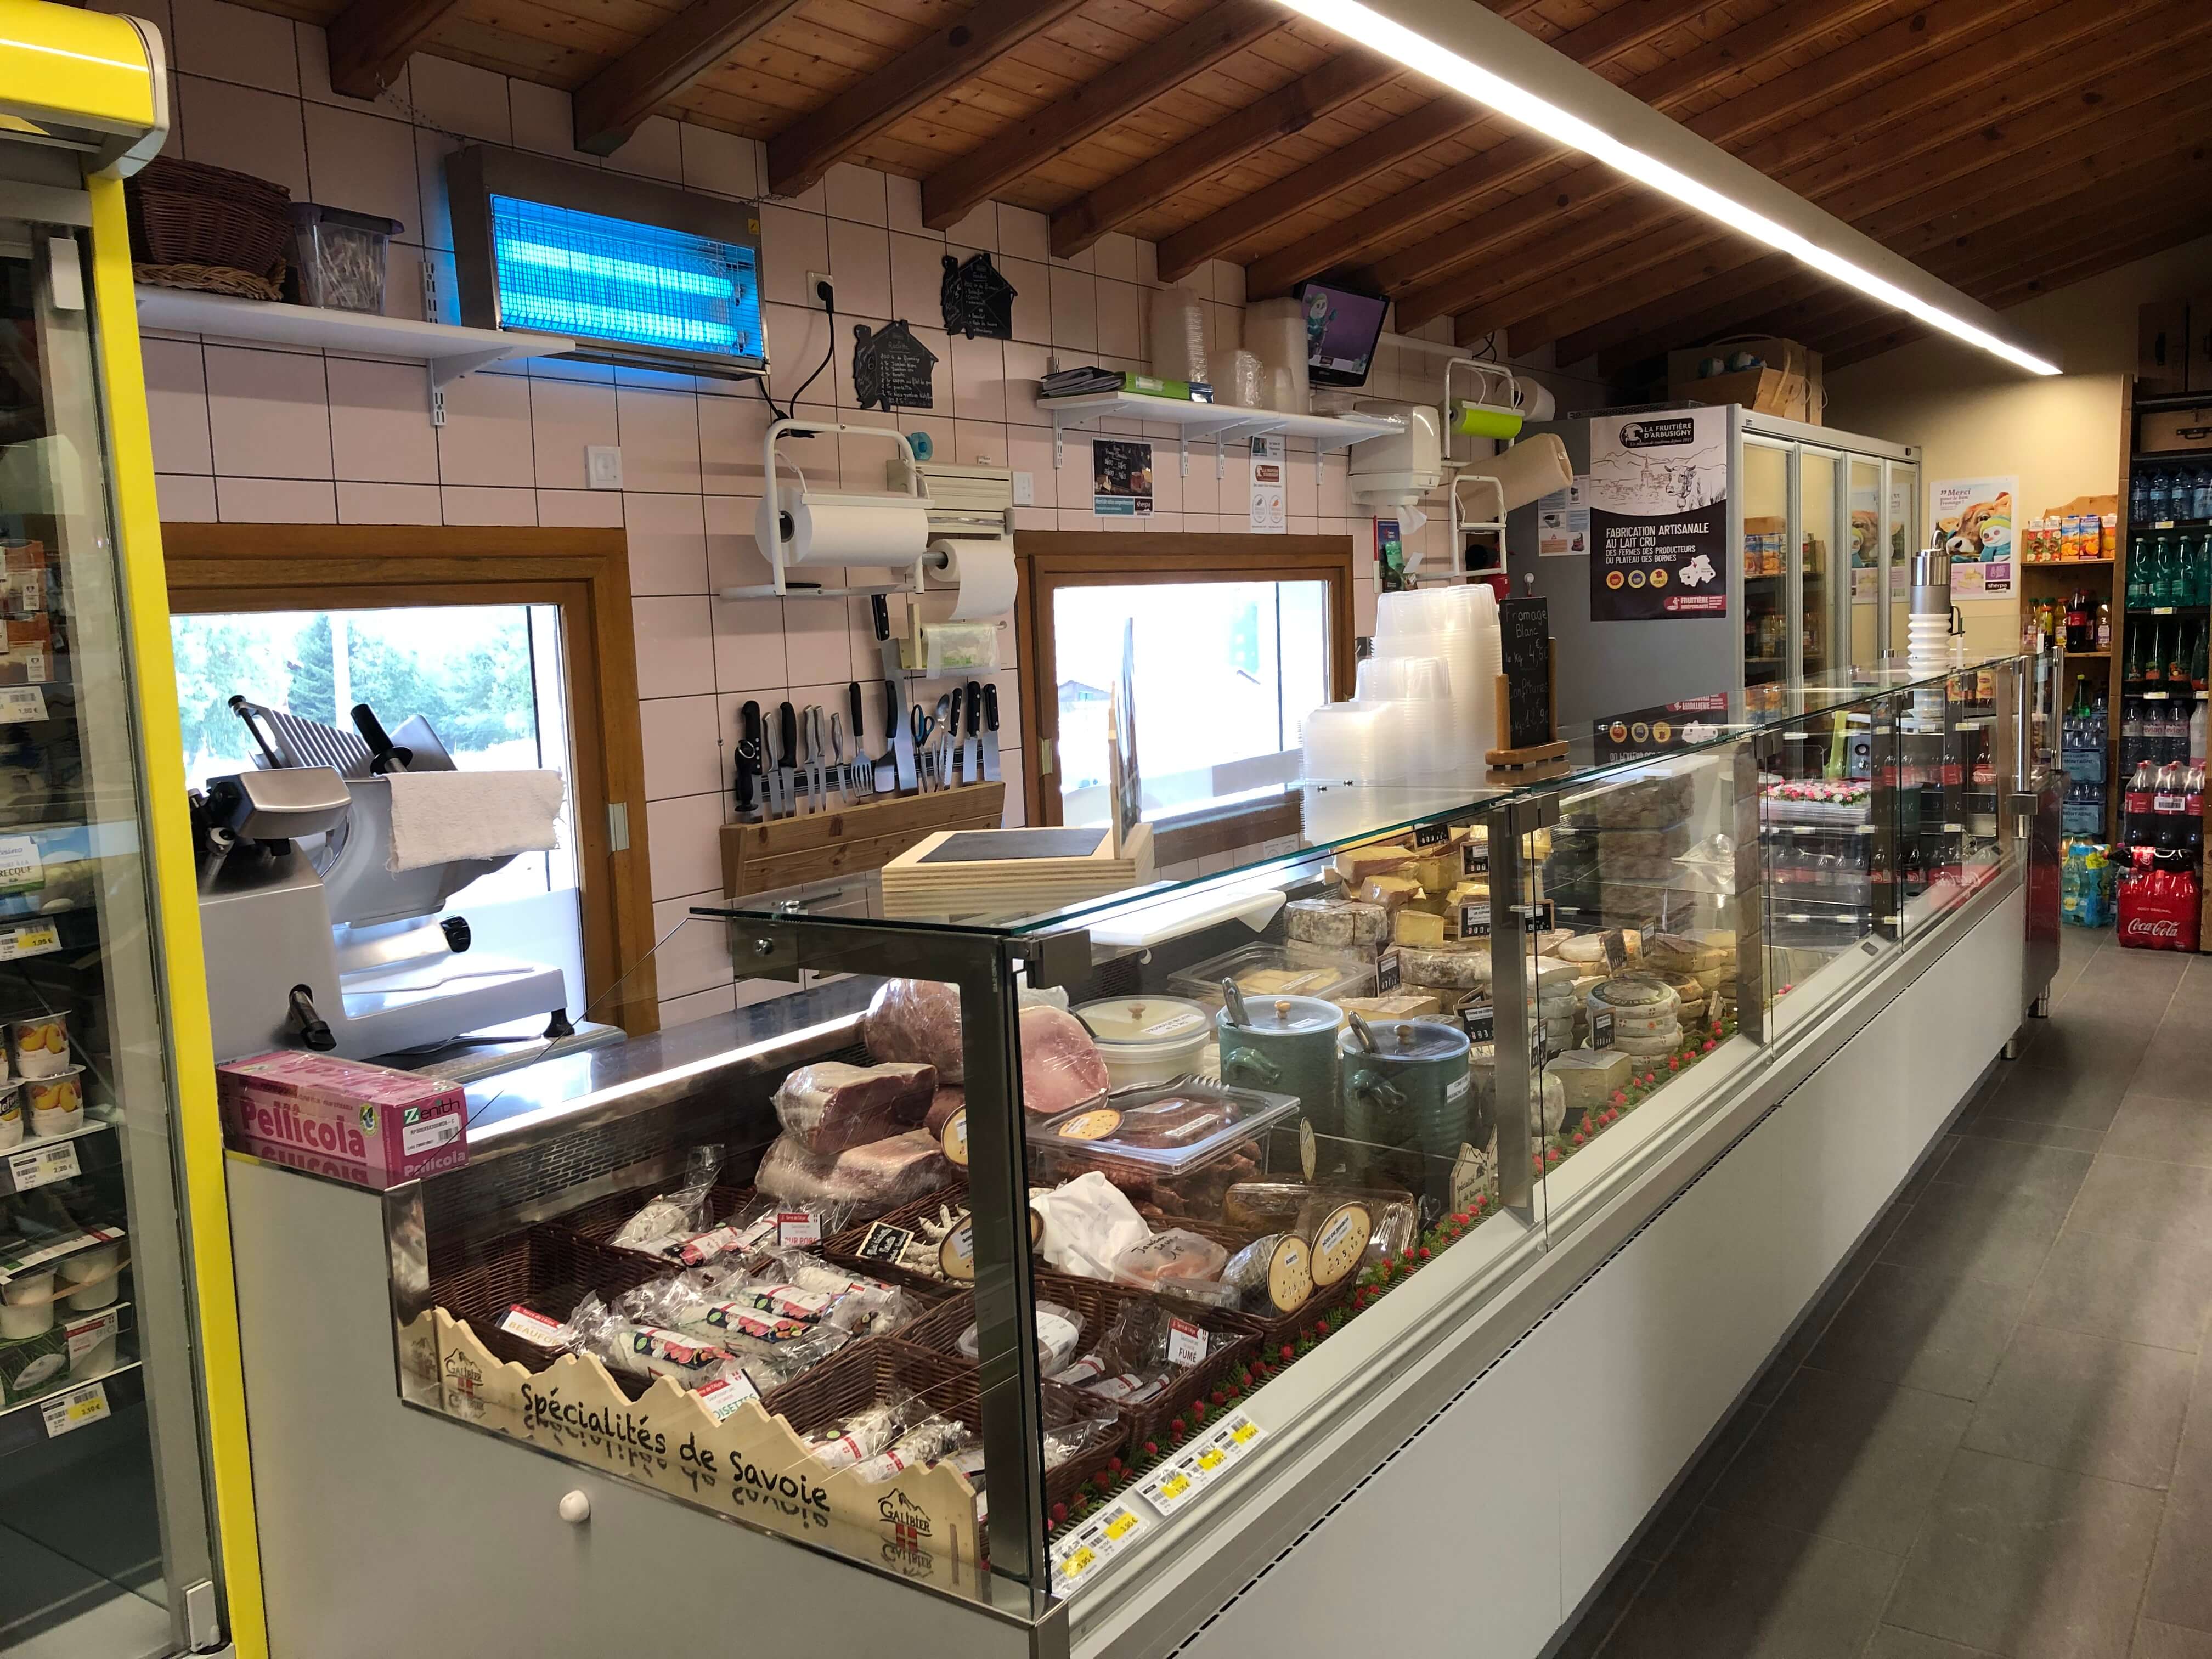 Sherpa supermarket Toussuire (la) cheese and butcher